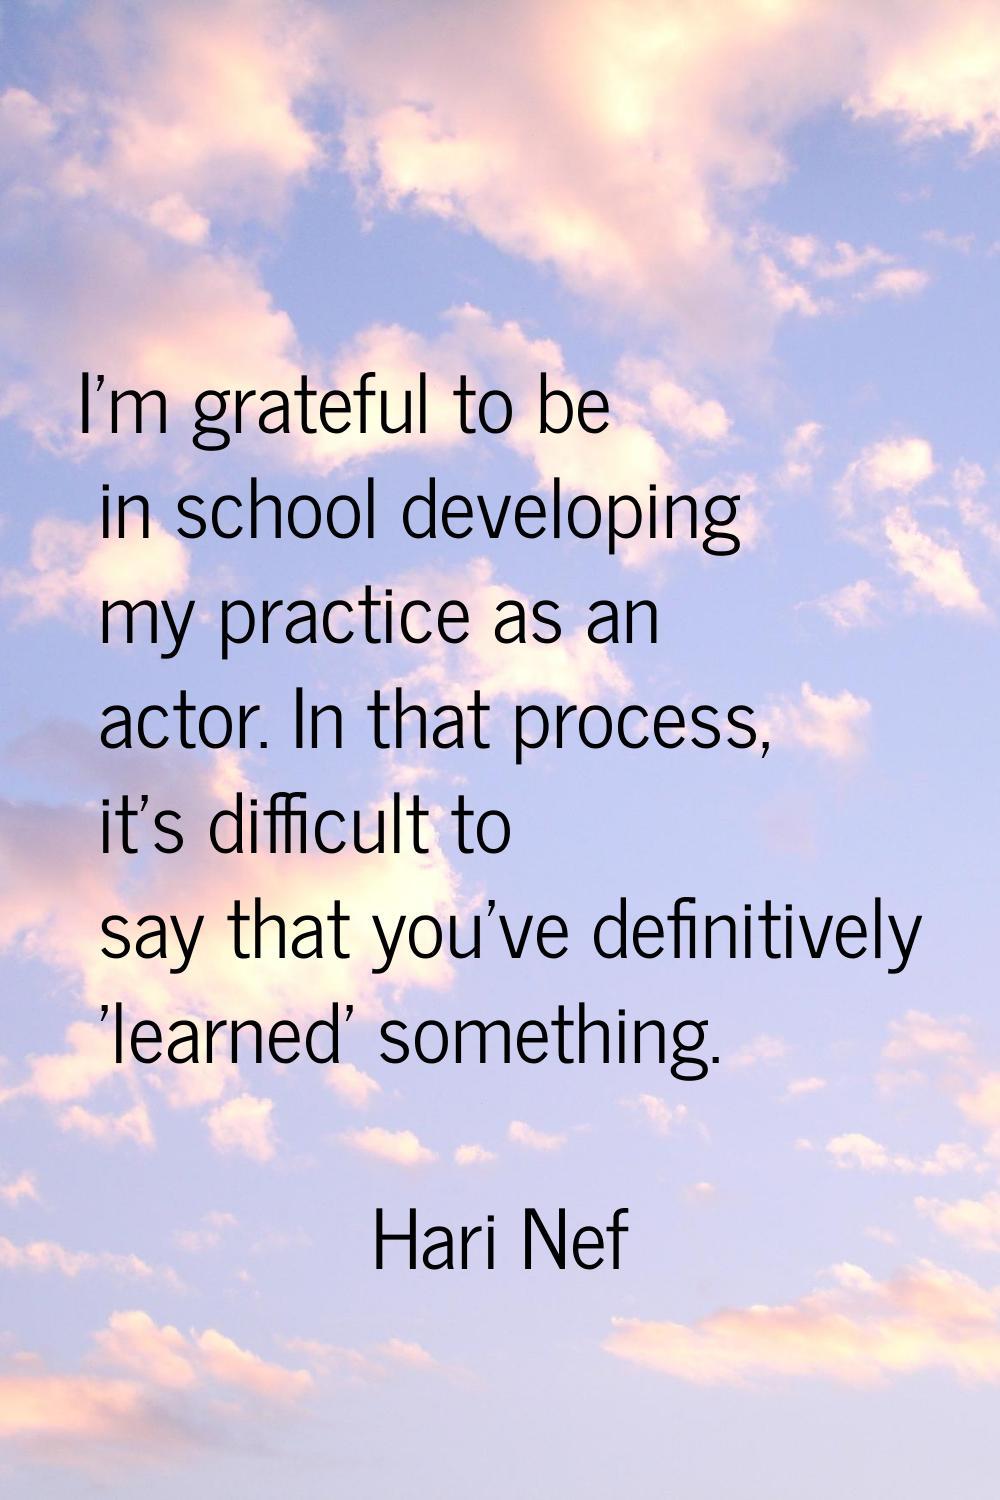 I'm grateful to be in school developing my practice as an actor. In that process, it's difficult to